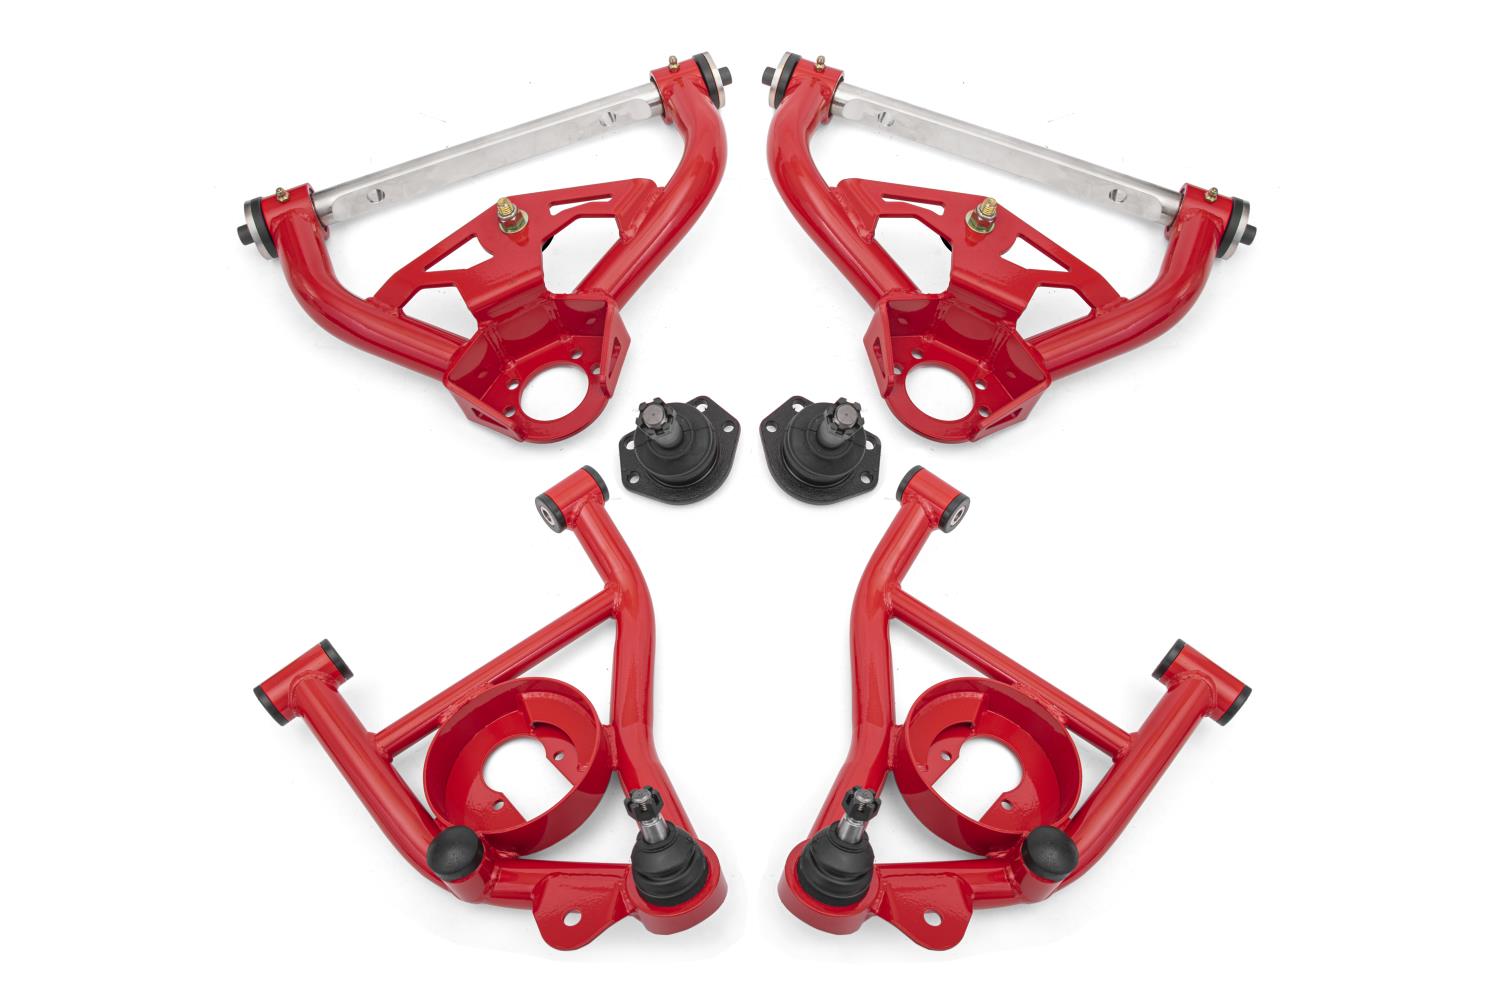 AAK462R Front Control Arm Kit w/Delrin Bushings & 1/2 in. Taller Ball Joints for Select 1978-1987 GM Cars (Red)